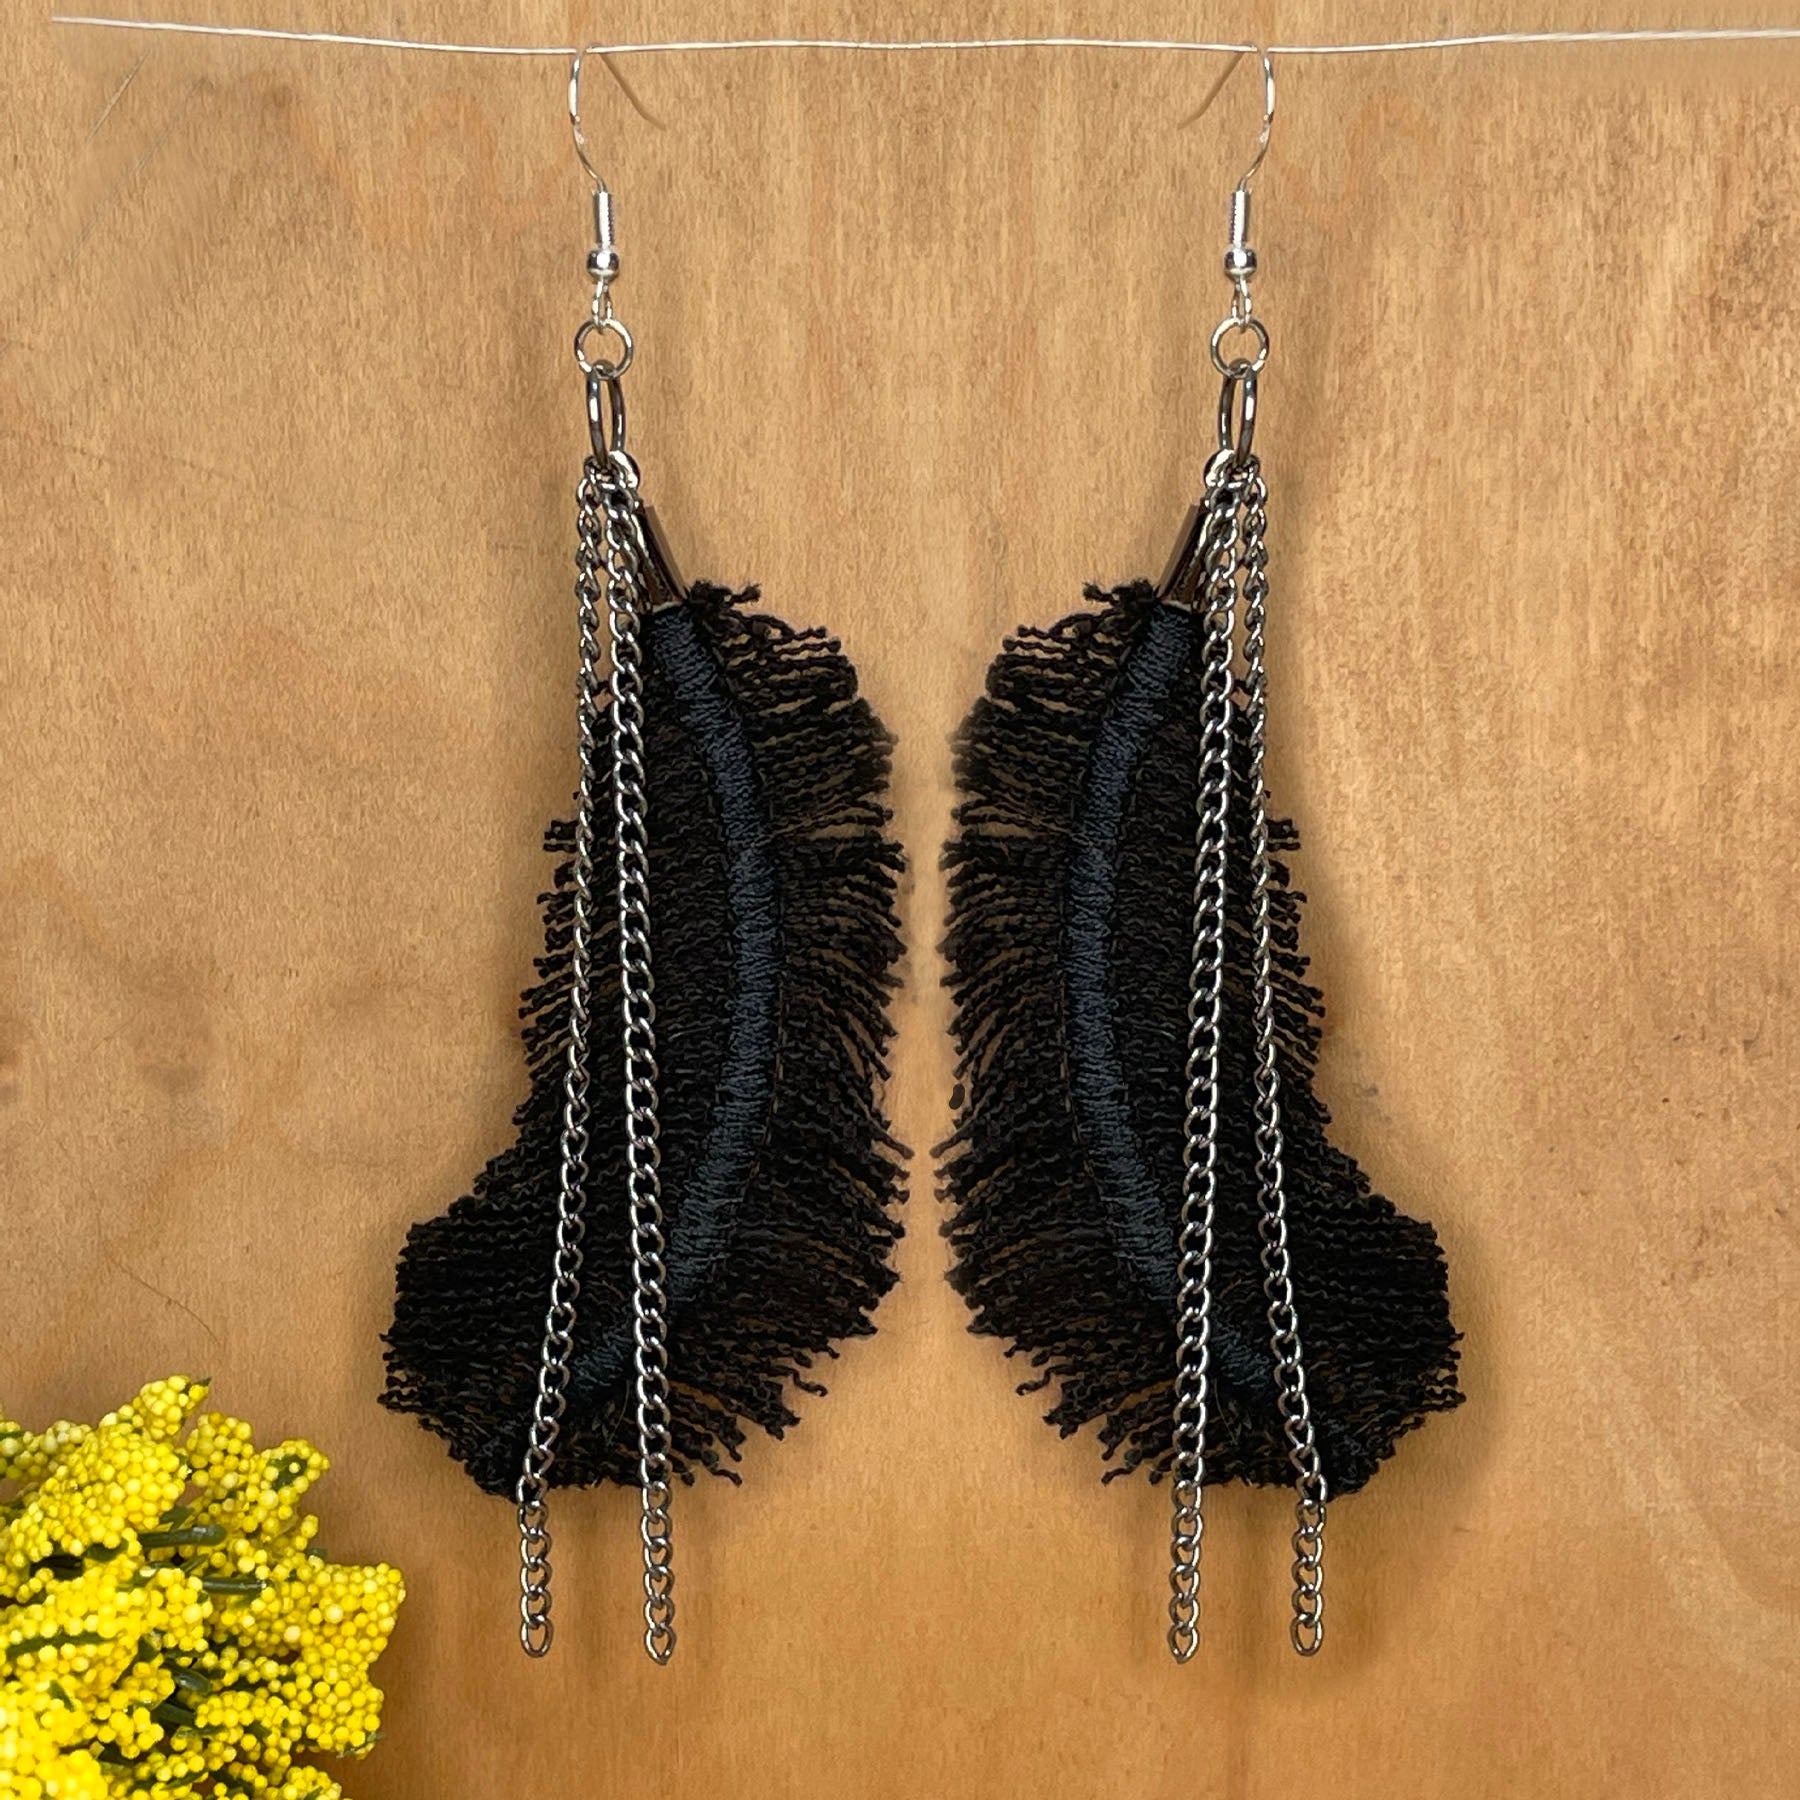 she-bang is upcycled handmade unique feather earrings, unique jewelry, made from recycled denim materials and chains, completely one of a kind jewelry made by local brooklyn designers